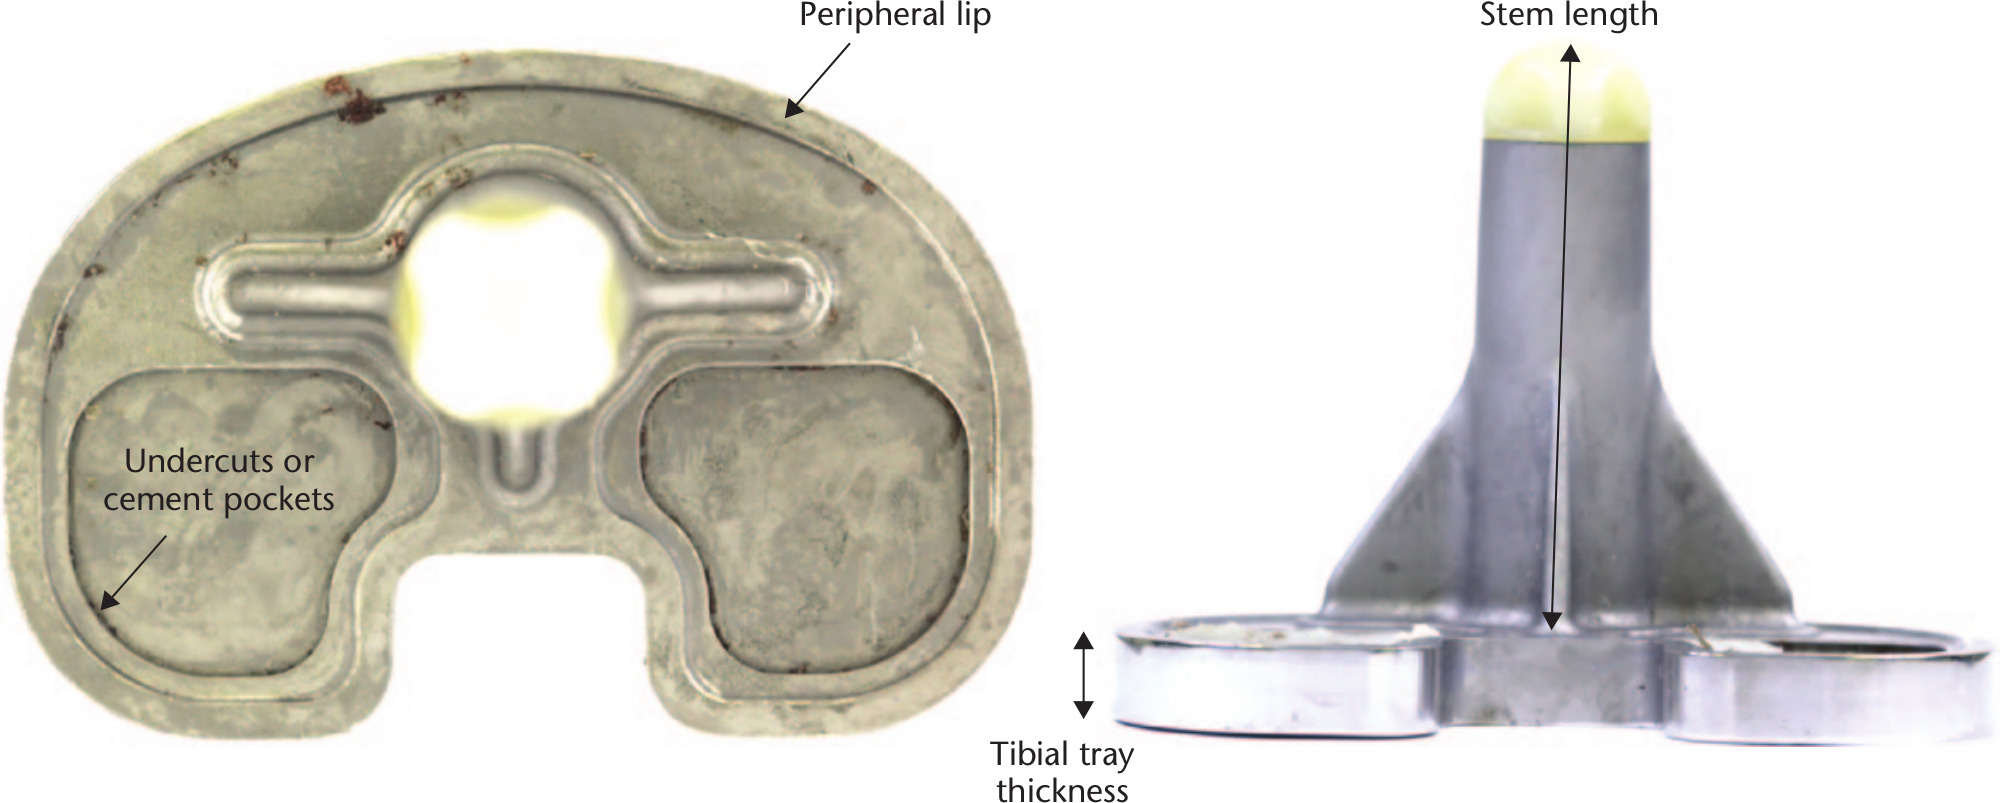 Fig. 3 
            Design features analyzed by visual inspection: undercuts or cement pockets, peripheral lips,23 tibial tray thickness, and stem length.
          